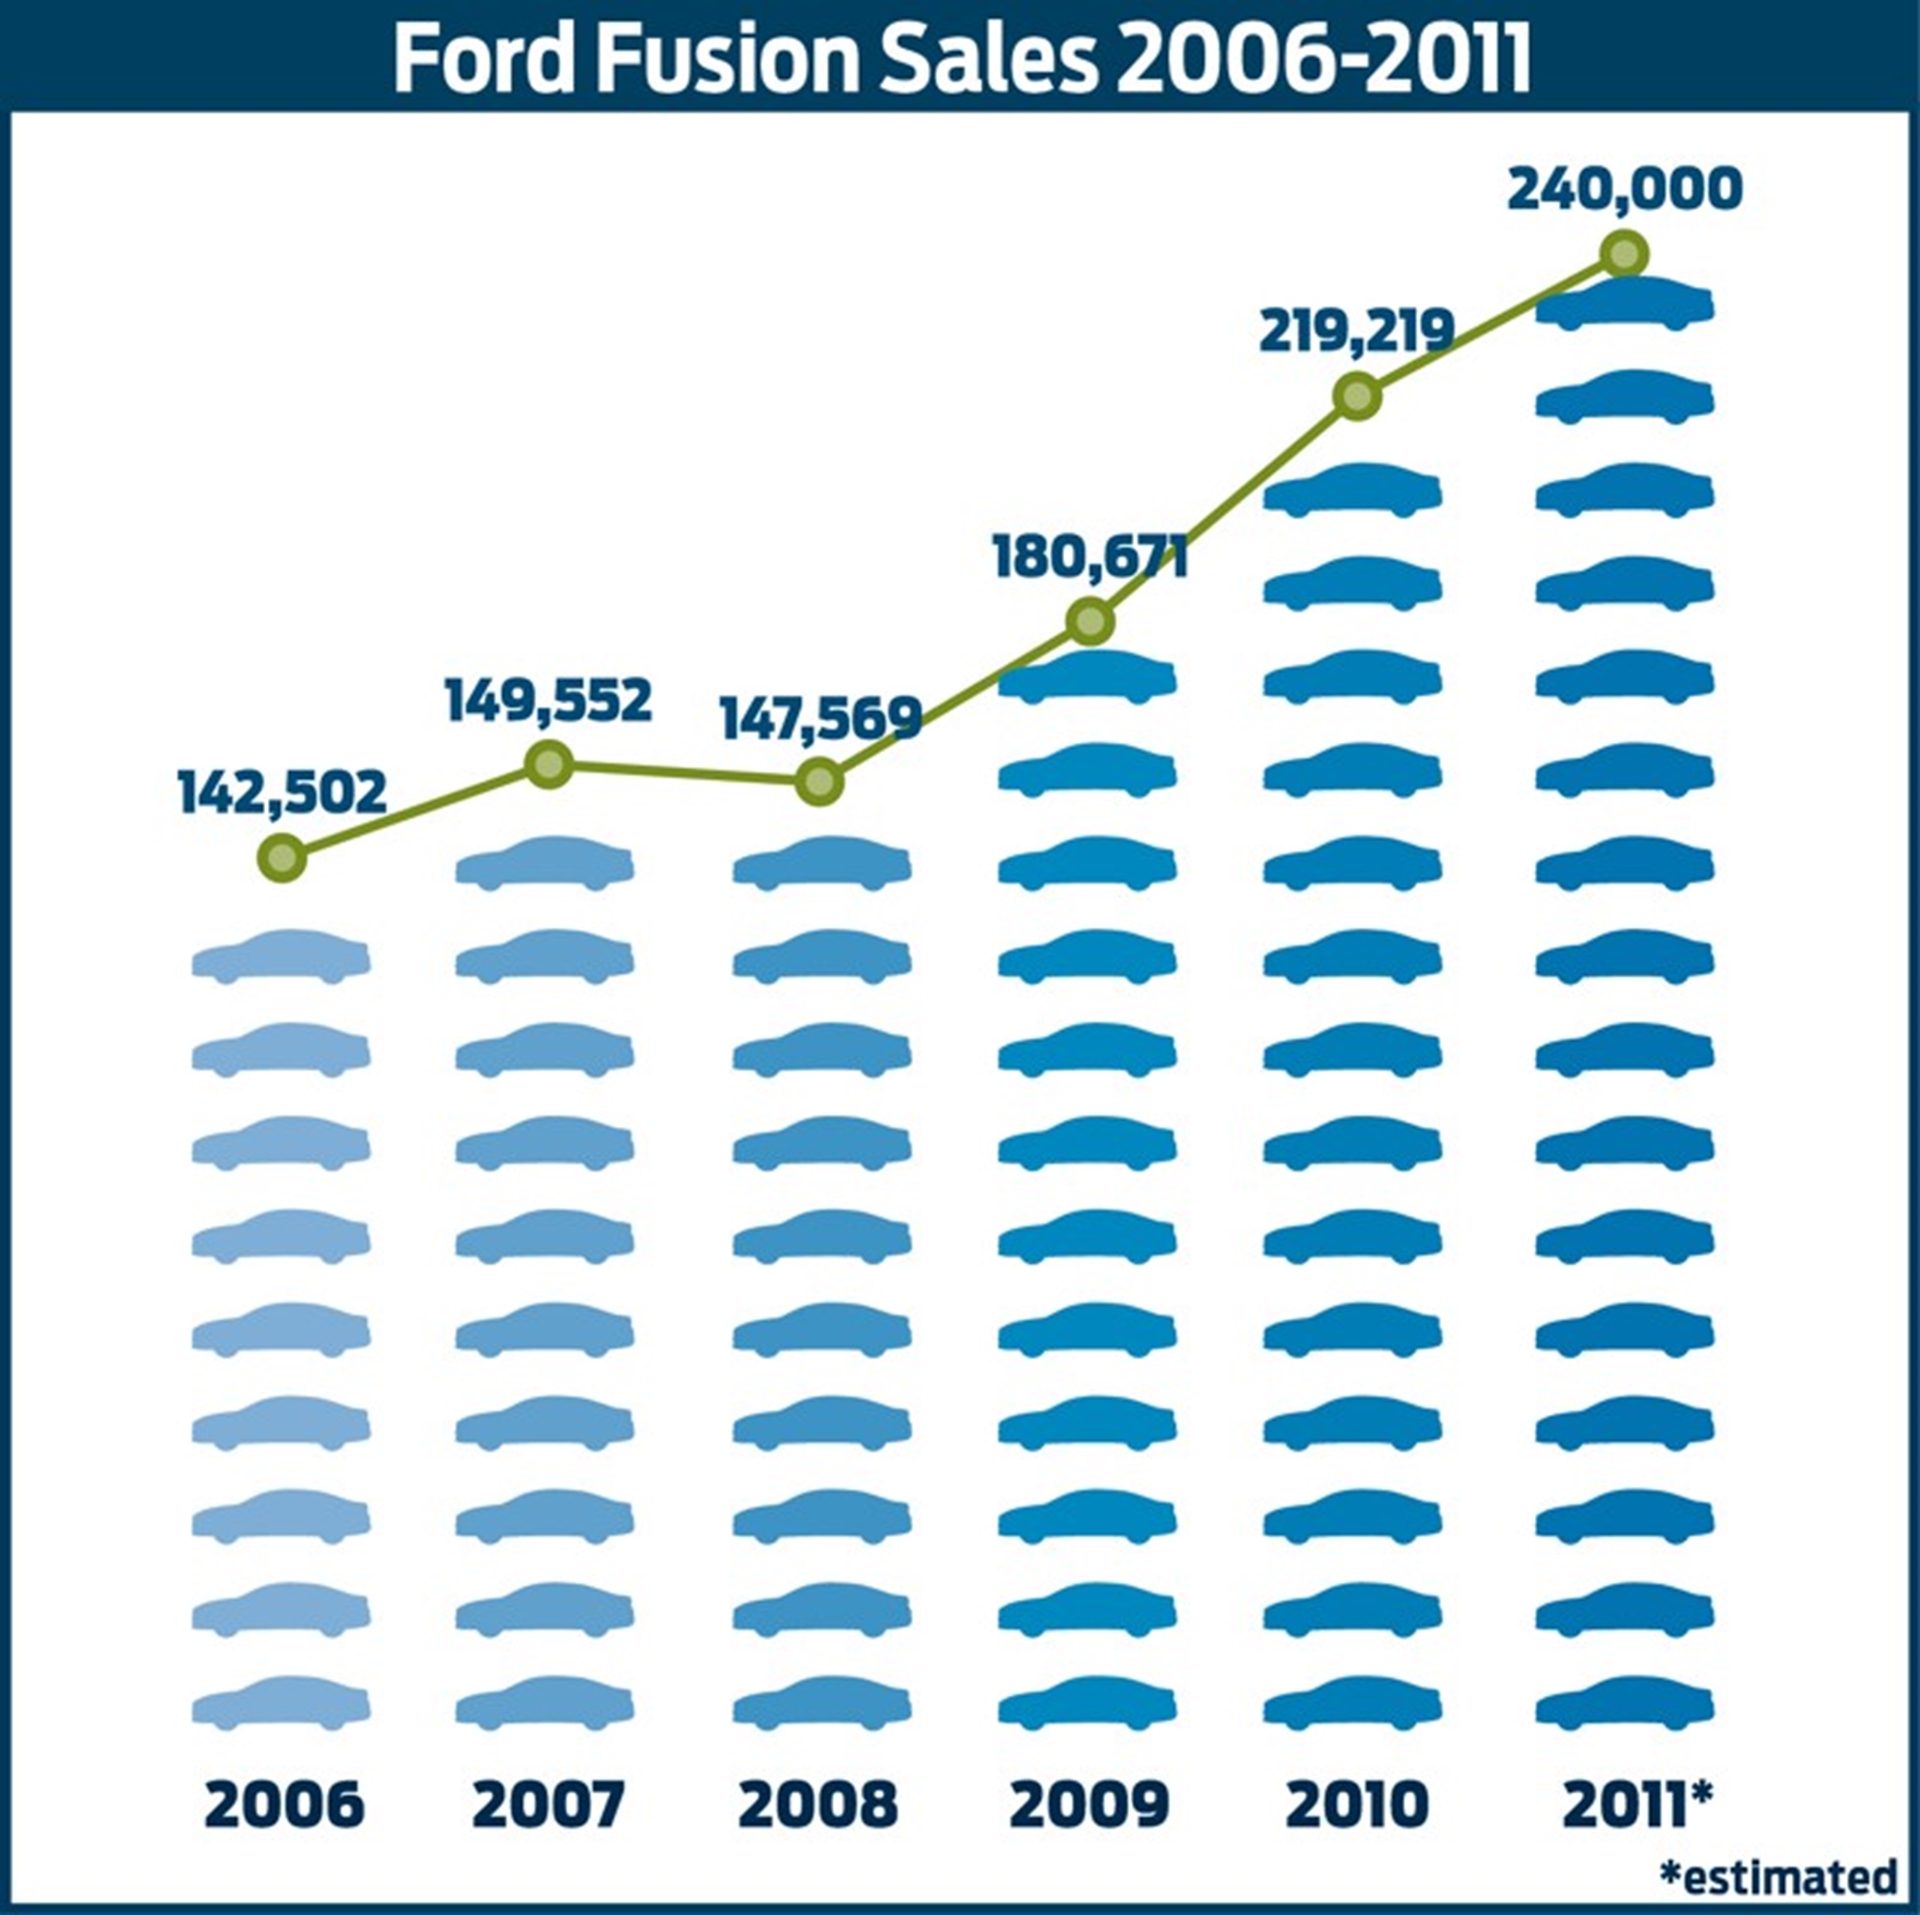 Best Sales Year Ever for Award-Winning Ford Fusion